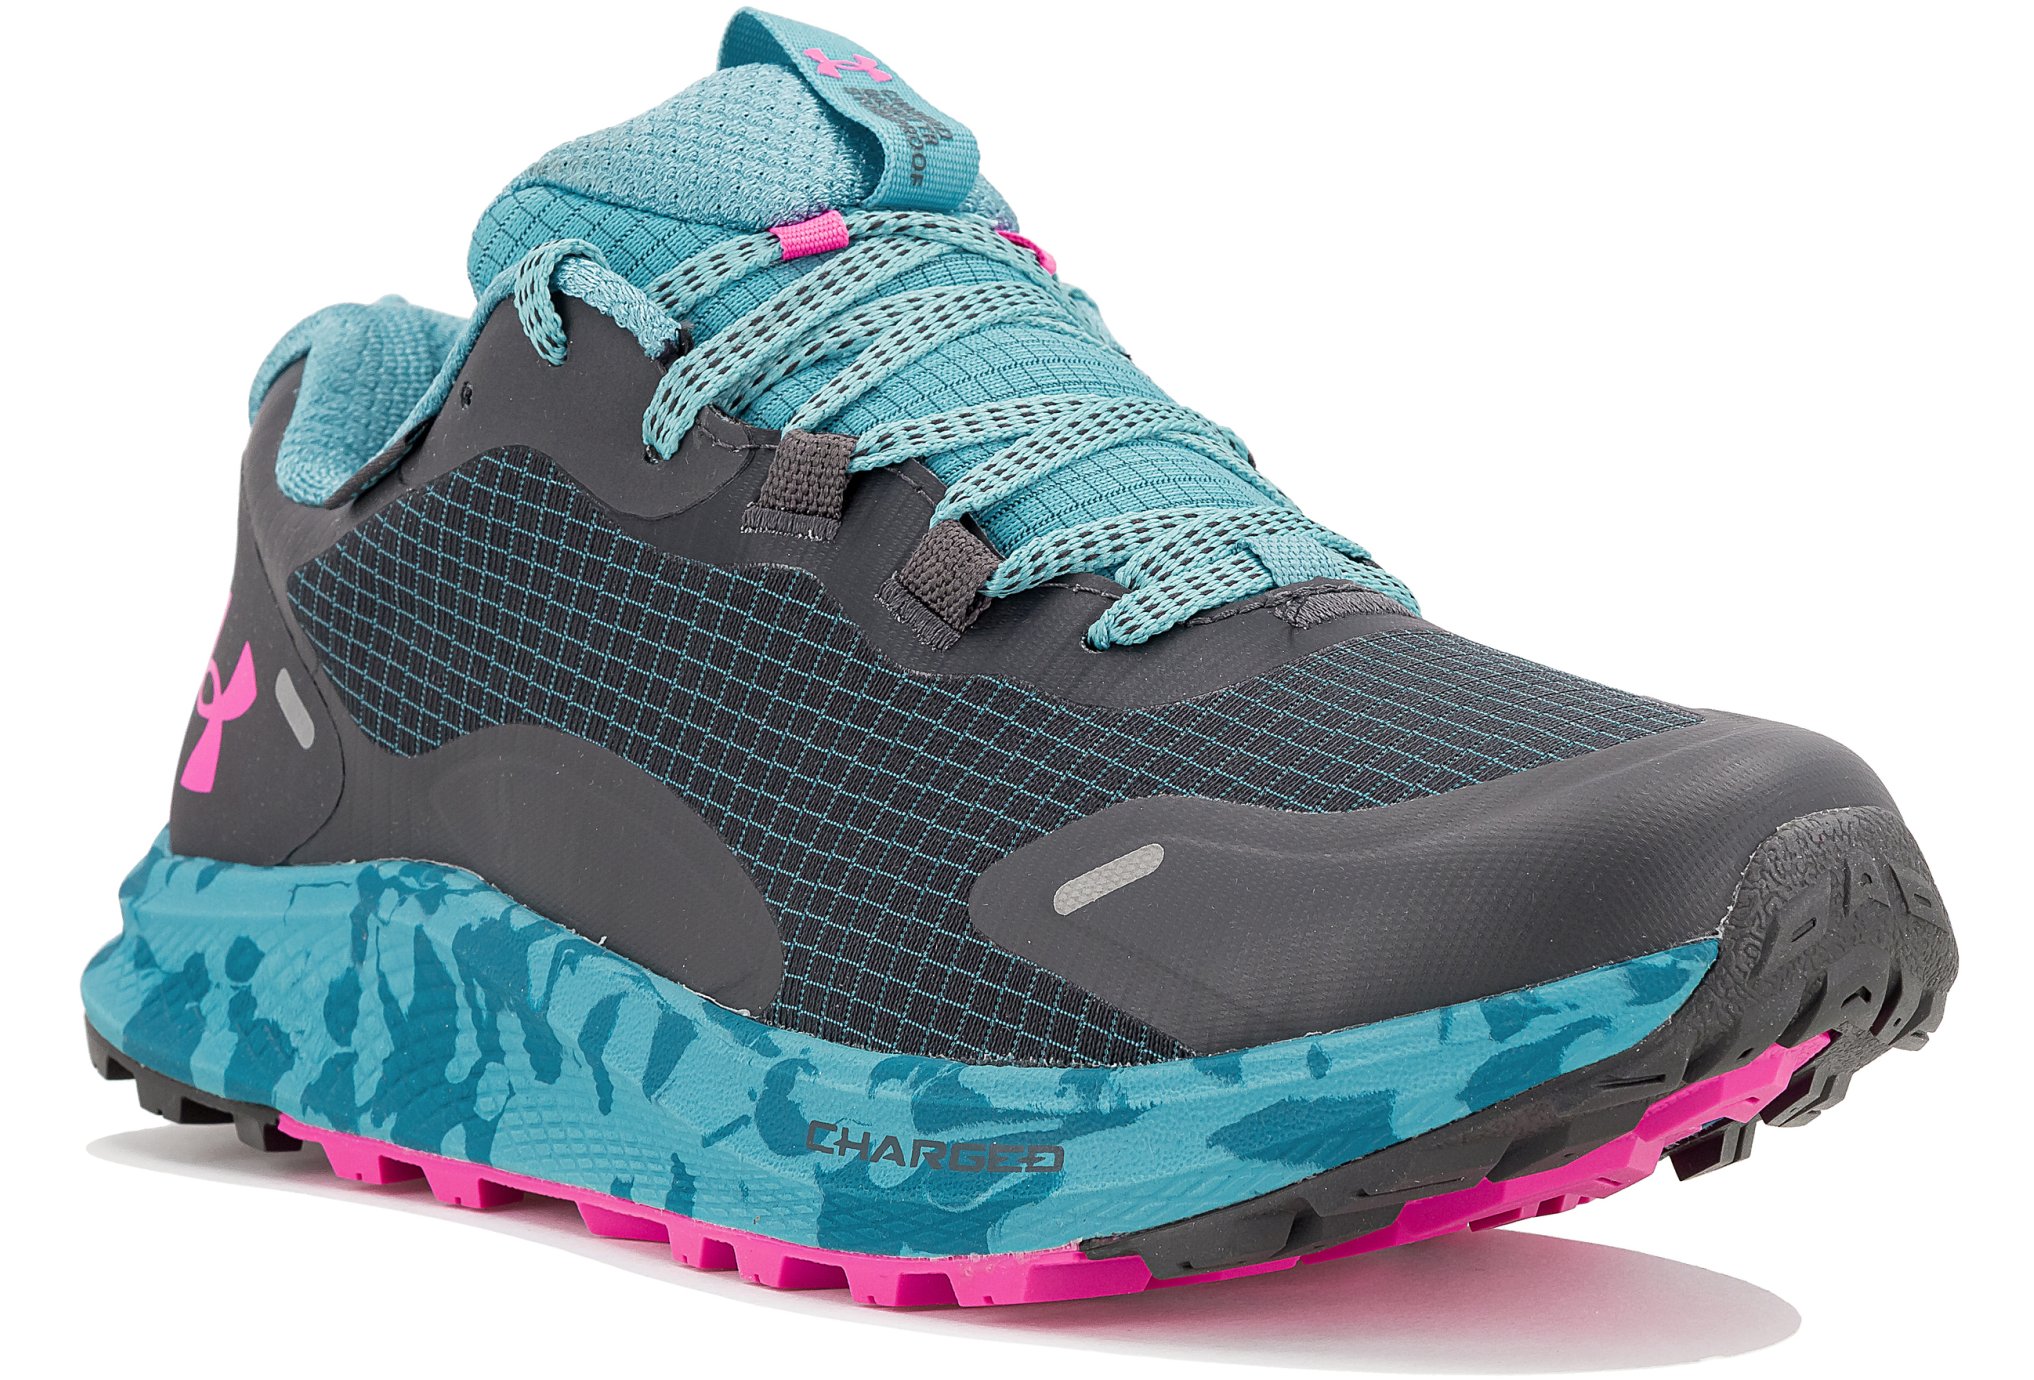 Under Armour Charged Bandit TR 2 SP W Chaussures running femme